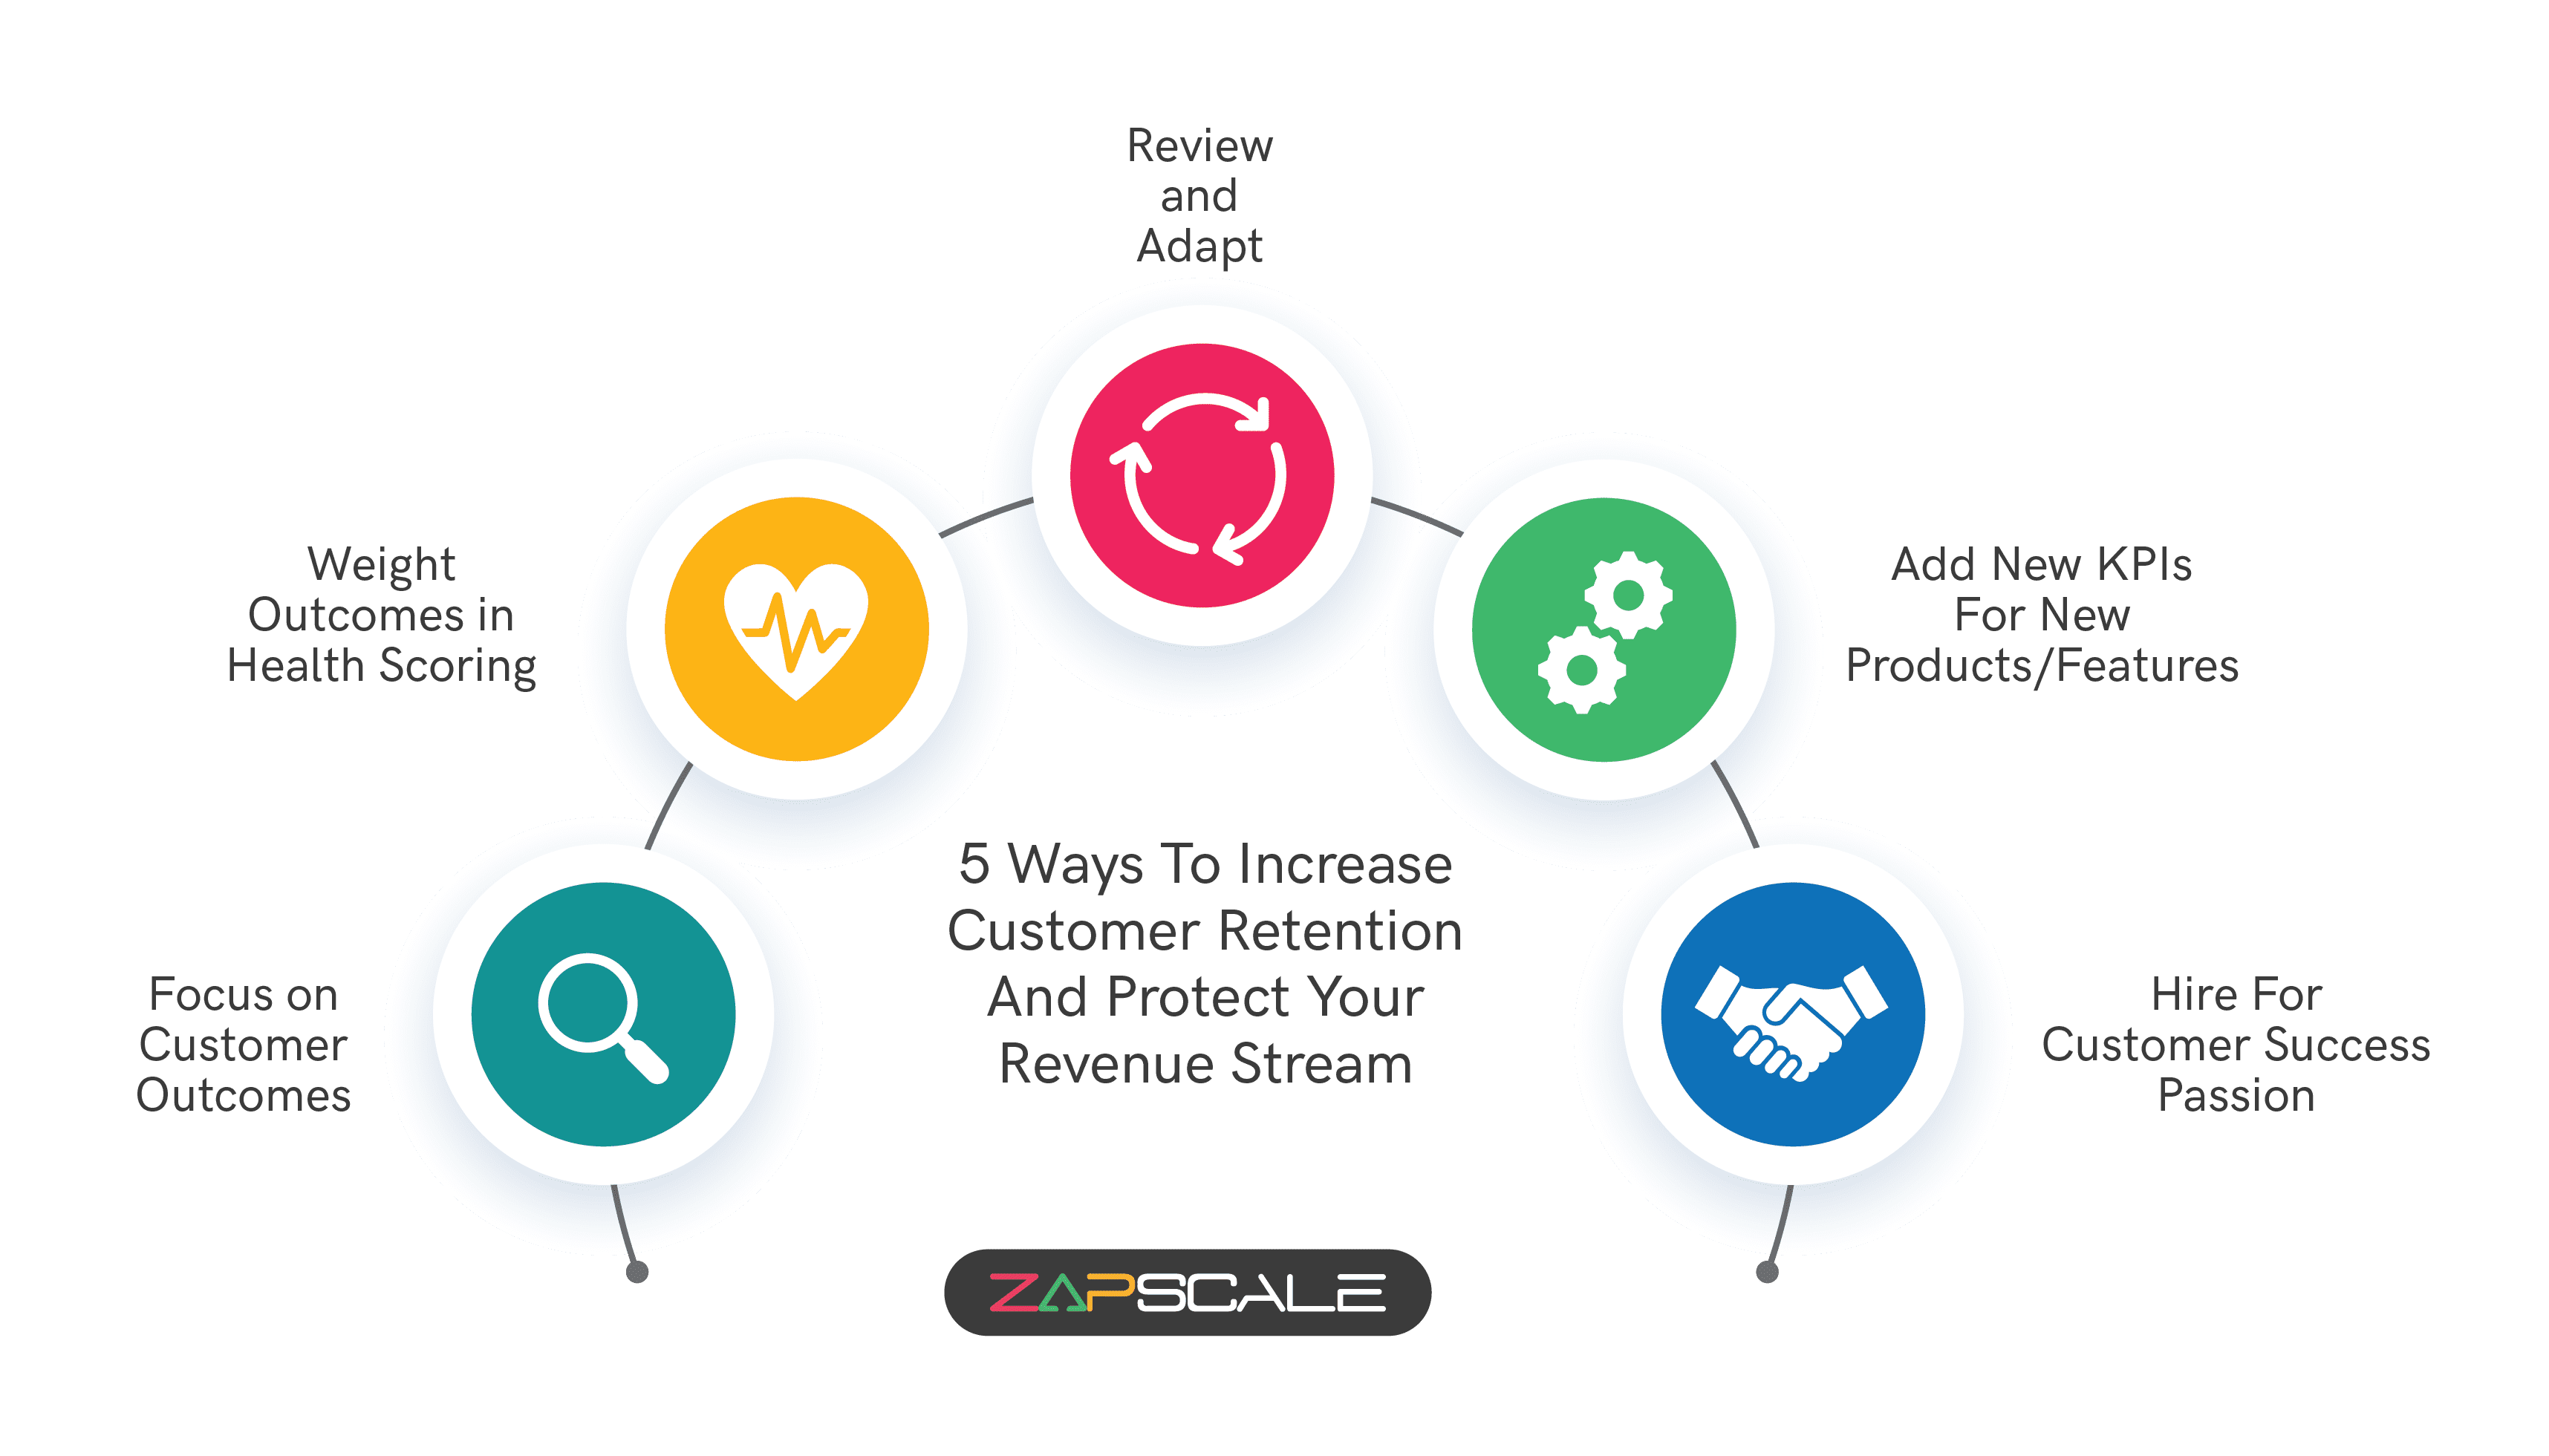 5 effective ways to increase customer retention - infographic by ZapScale